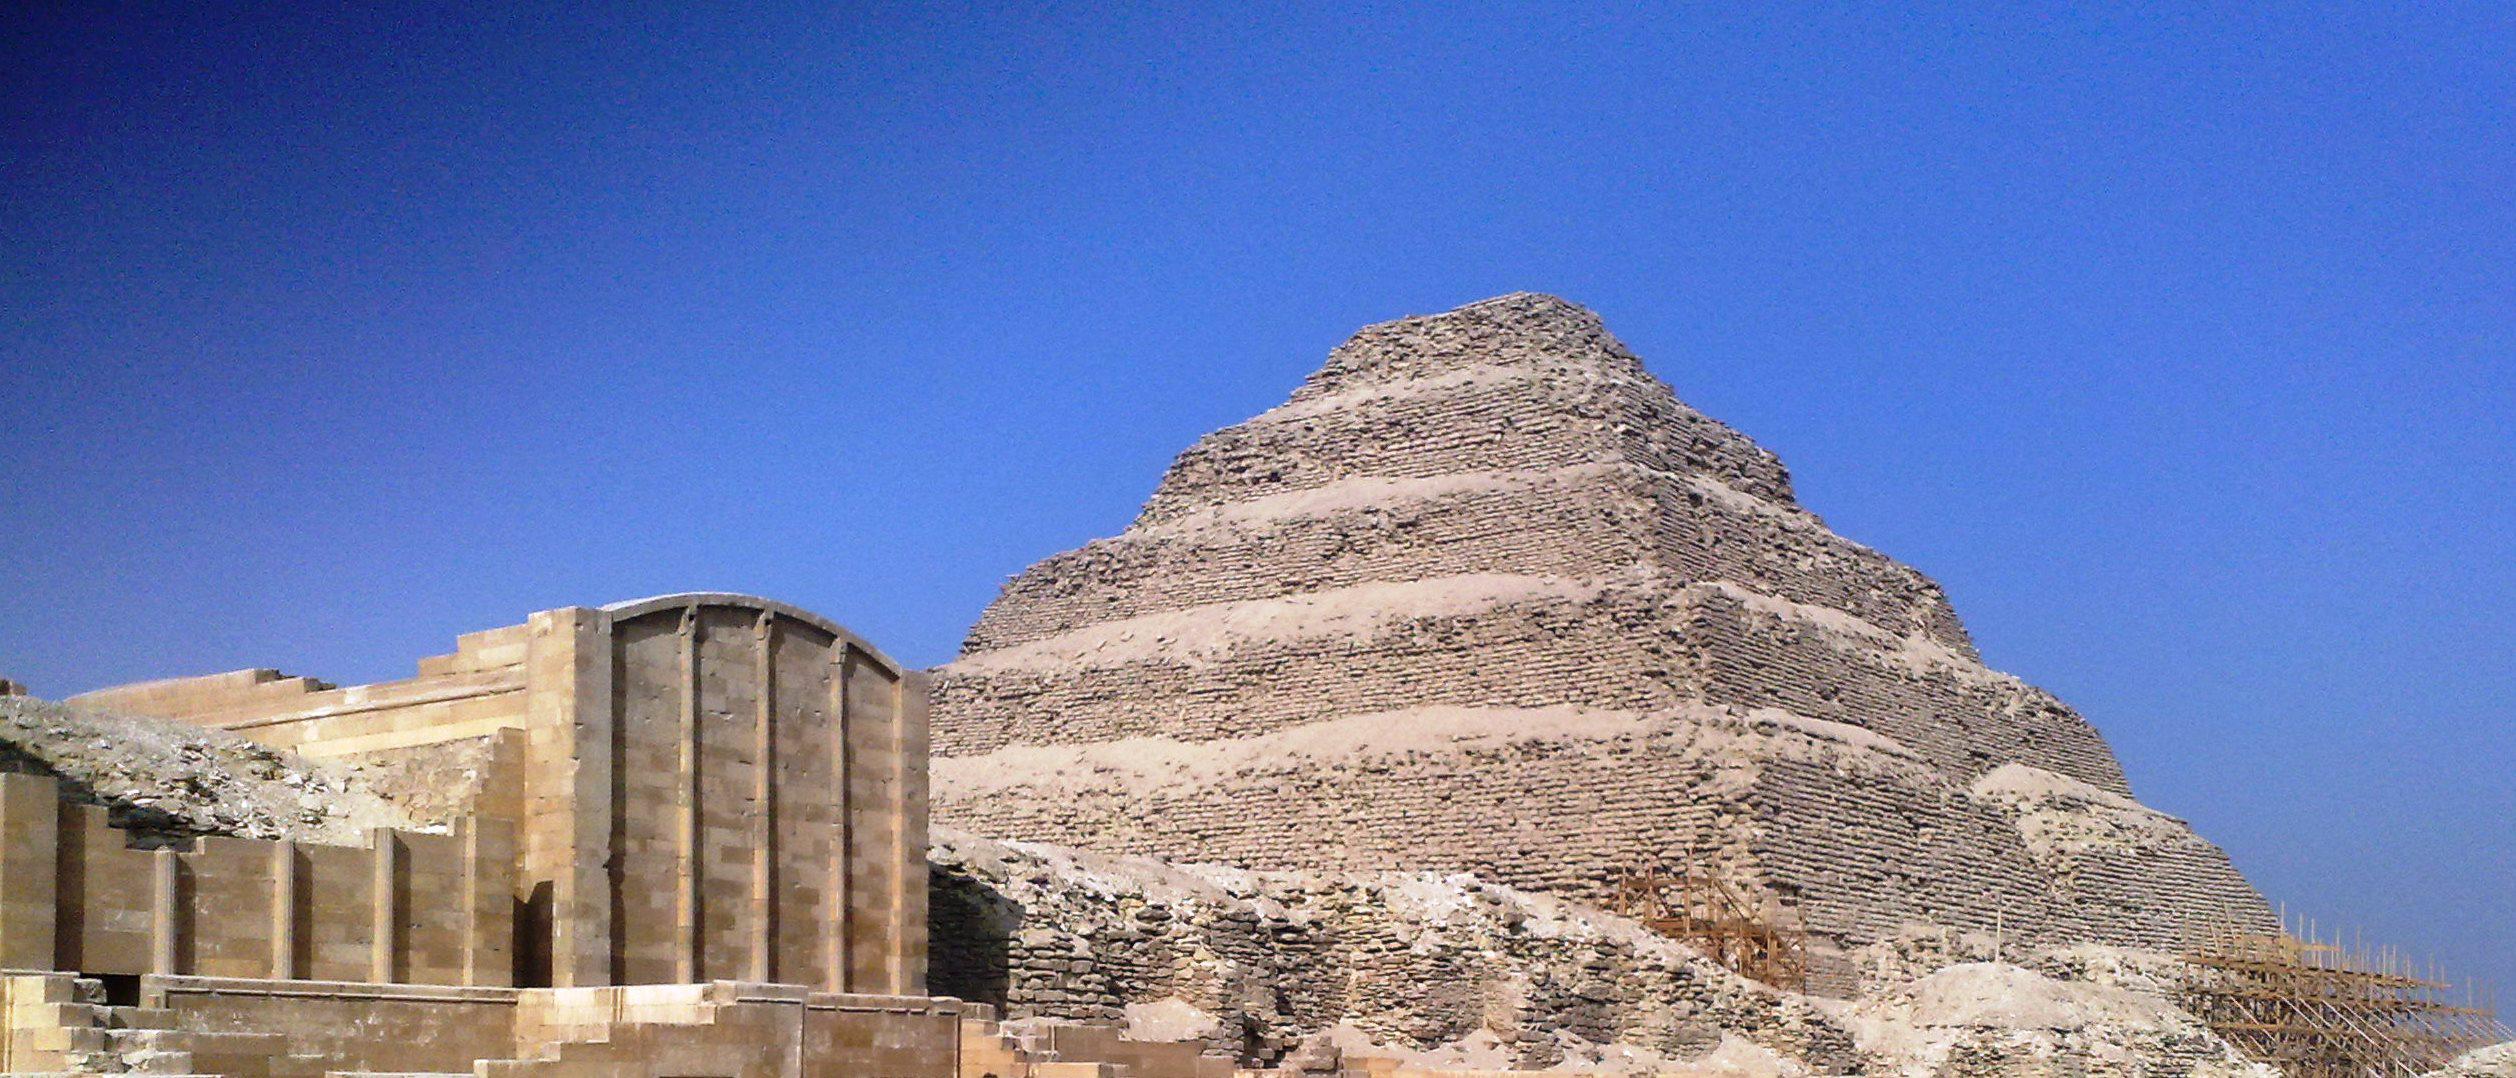 Stepped Pyramid of Djoser at Saqqara by Mariam Mohamed Kamal – own work Licensed under CC BY-SA 3.0 via Commons - https://upload.wikimedia.org/wikipedia/commons/f/f5/Stepped_Pyramid_of_Djoser_at_Saqqara.jpg